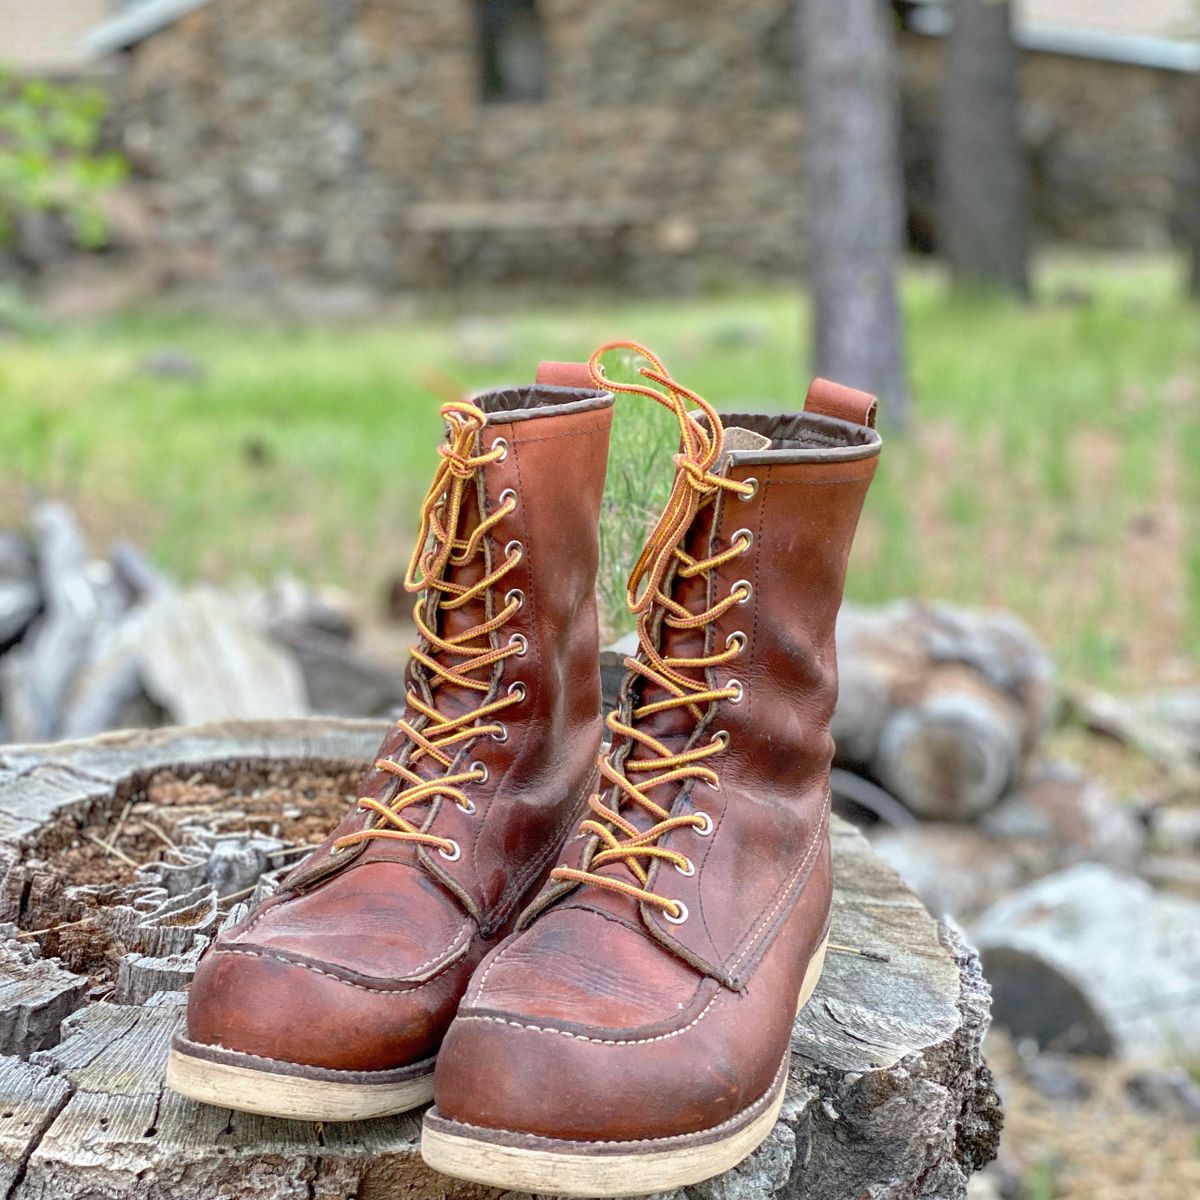 Red Wing Heritage 877 Boot in Size 11D